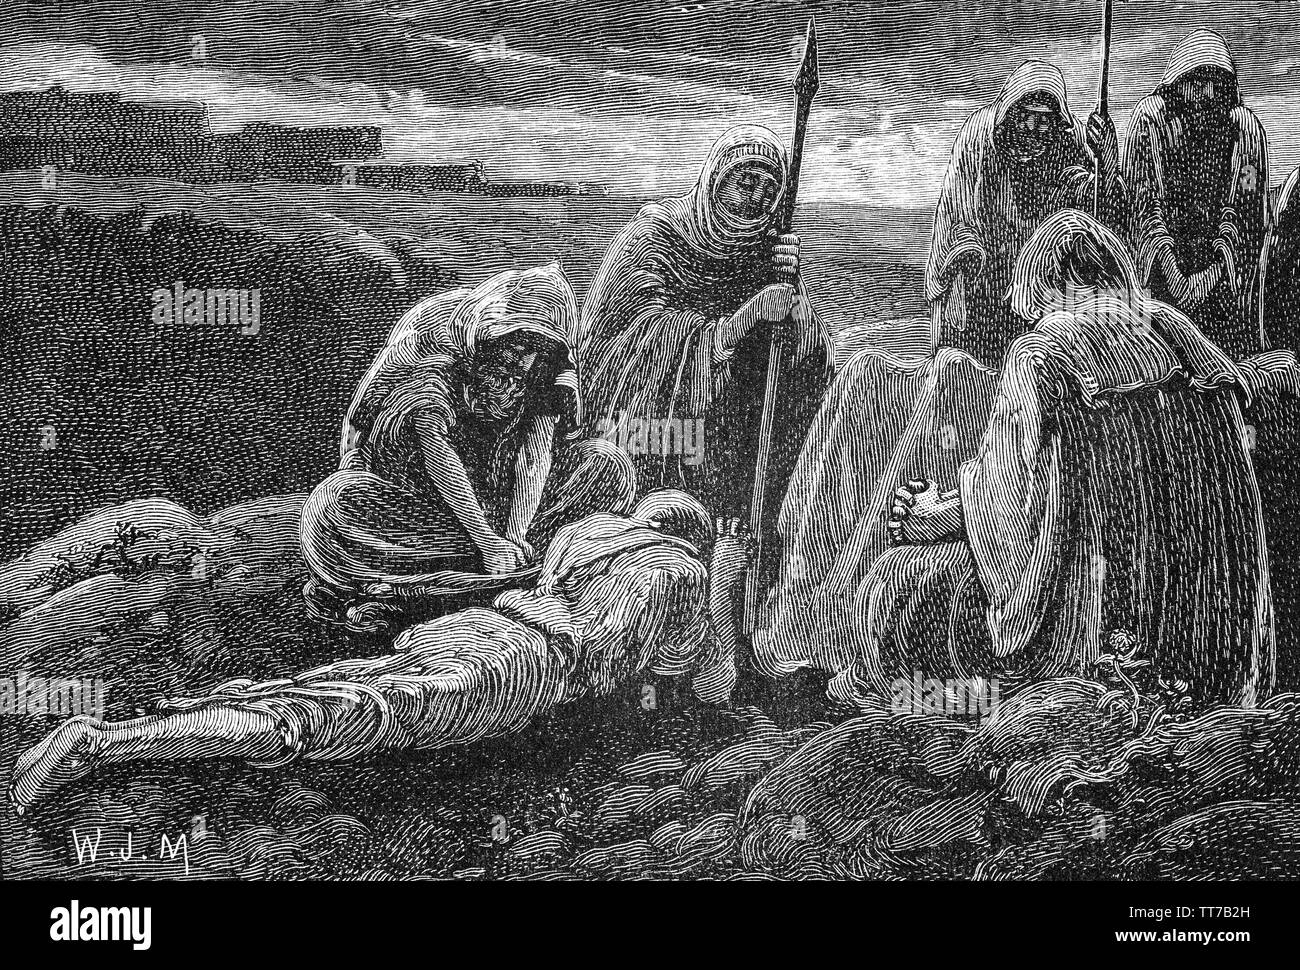 Israelites mourning the death in 1010 BC of  Jonathan killed in a battle against the Philistines at Mount Gilboa overlooking the Jezreel Valley in Israel. Along with Saul who fell on his sword (committing suicide) to avoid capture in the battle. Despoiled by the Philistines, the bodies were rescued by men from Jabesh-gilead and buried in Jabesh. Stock Photo